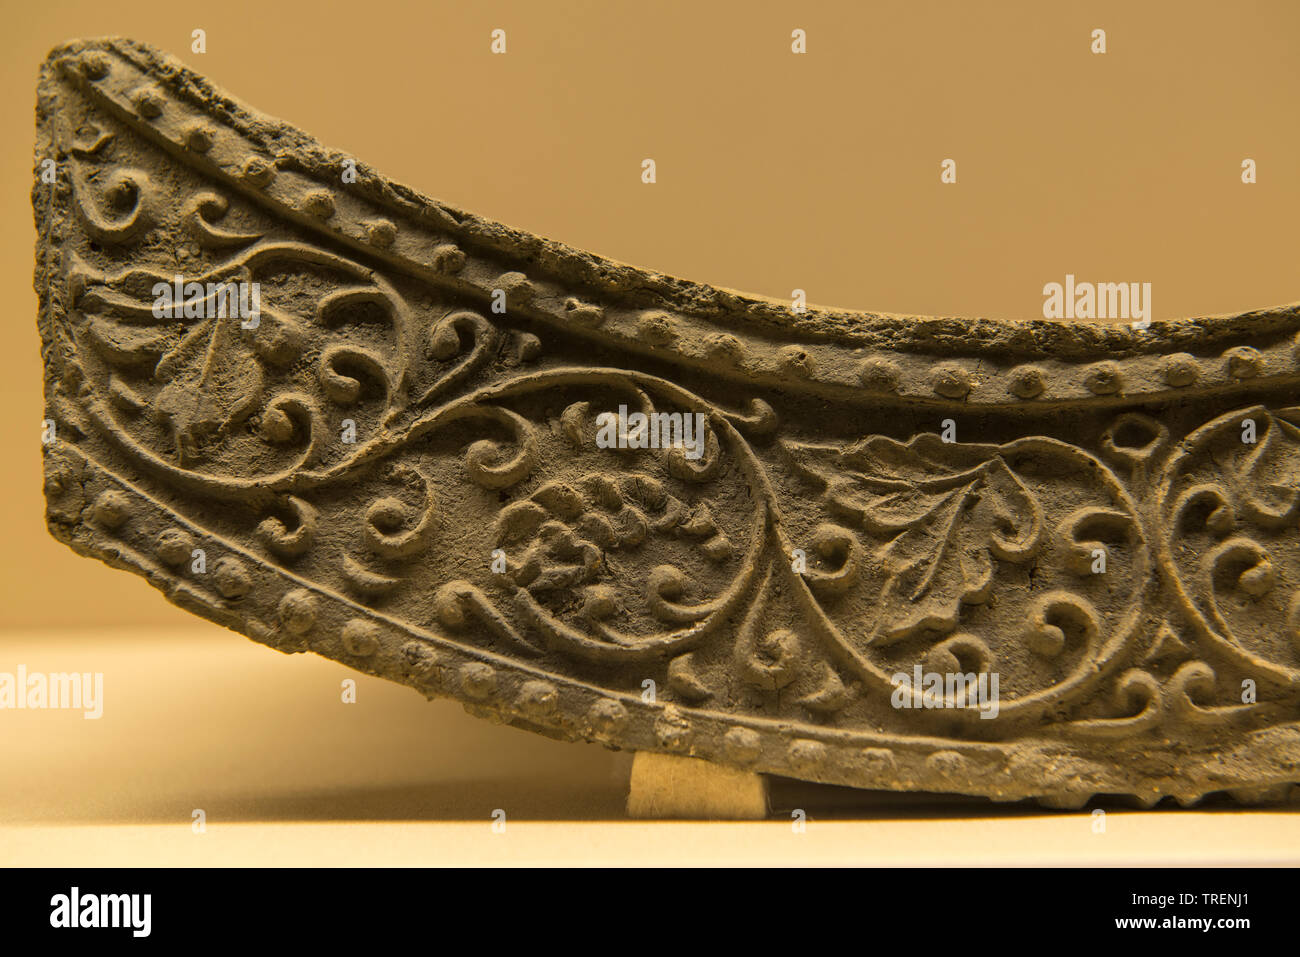 Concave Roof-end Tile with Grapevine Design. Clay. Unified Silla Period. Wolji Pond, Gyeongju, North Gyeongsang-do province. National Museum of Korea Stock Photo